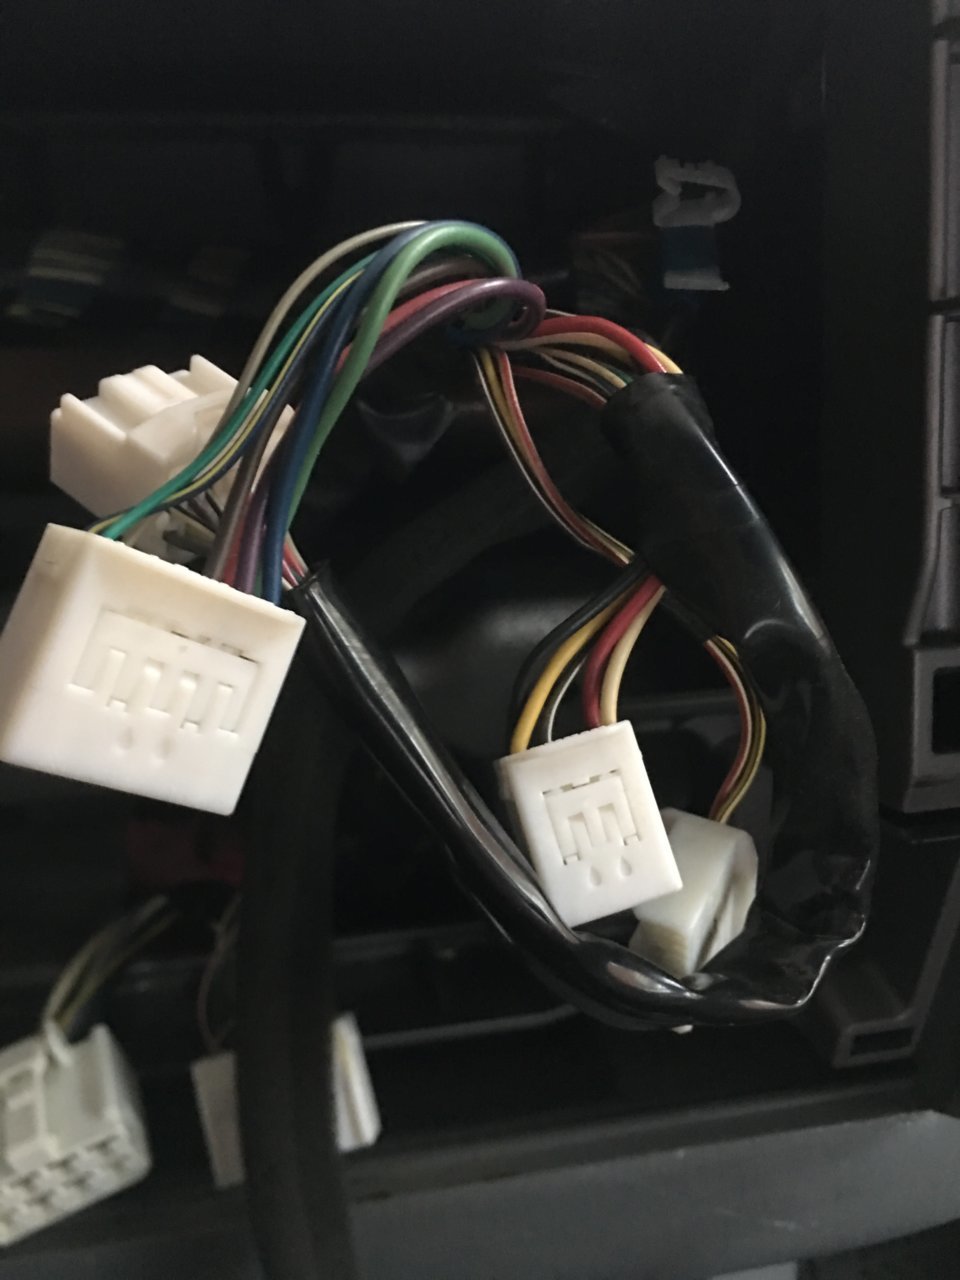 Toyota Tacoma Stereo Wiring Harness from twstatic.net